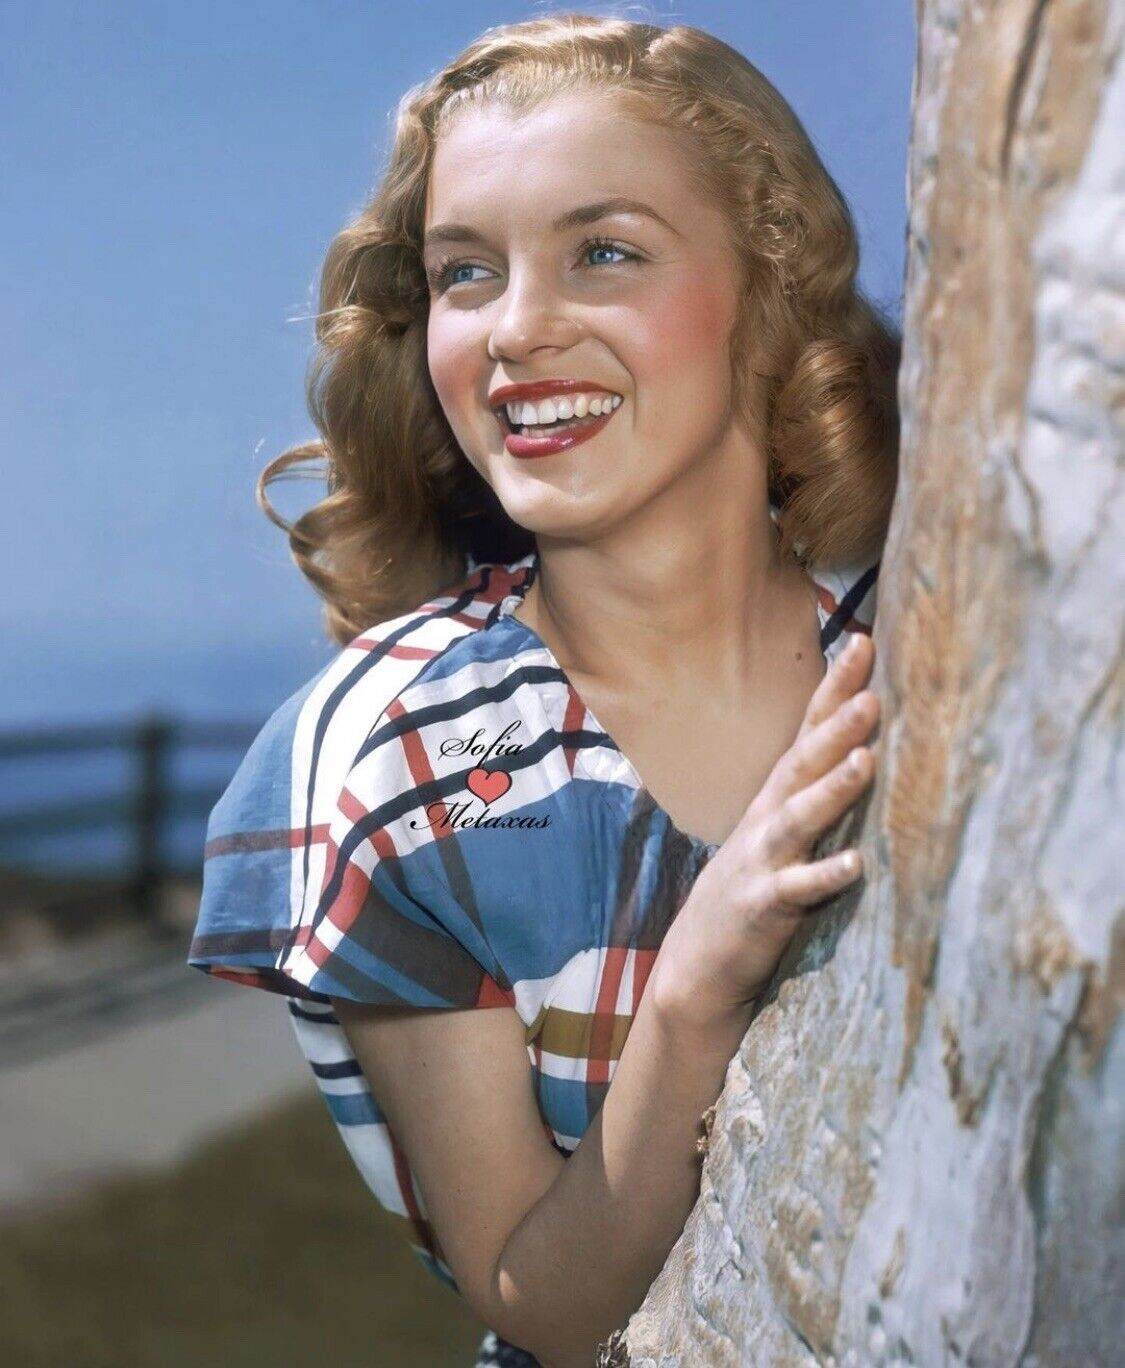 MARILYN MONROE - NORMA JEAN - A NICE SMILING SHOT OF A YOUNG MARILYN 